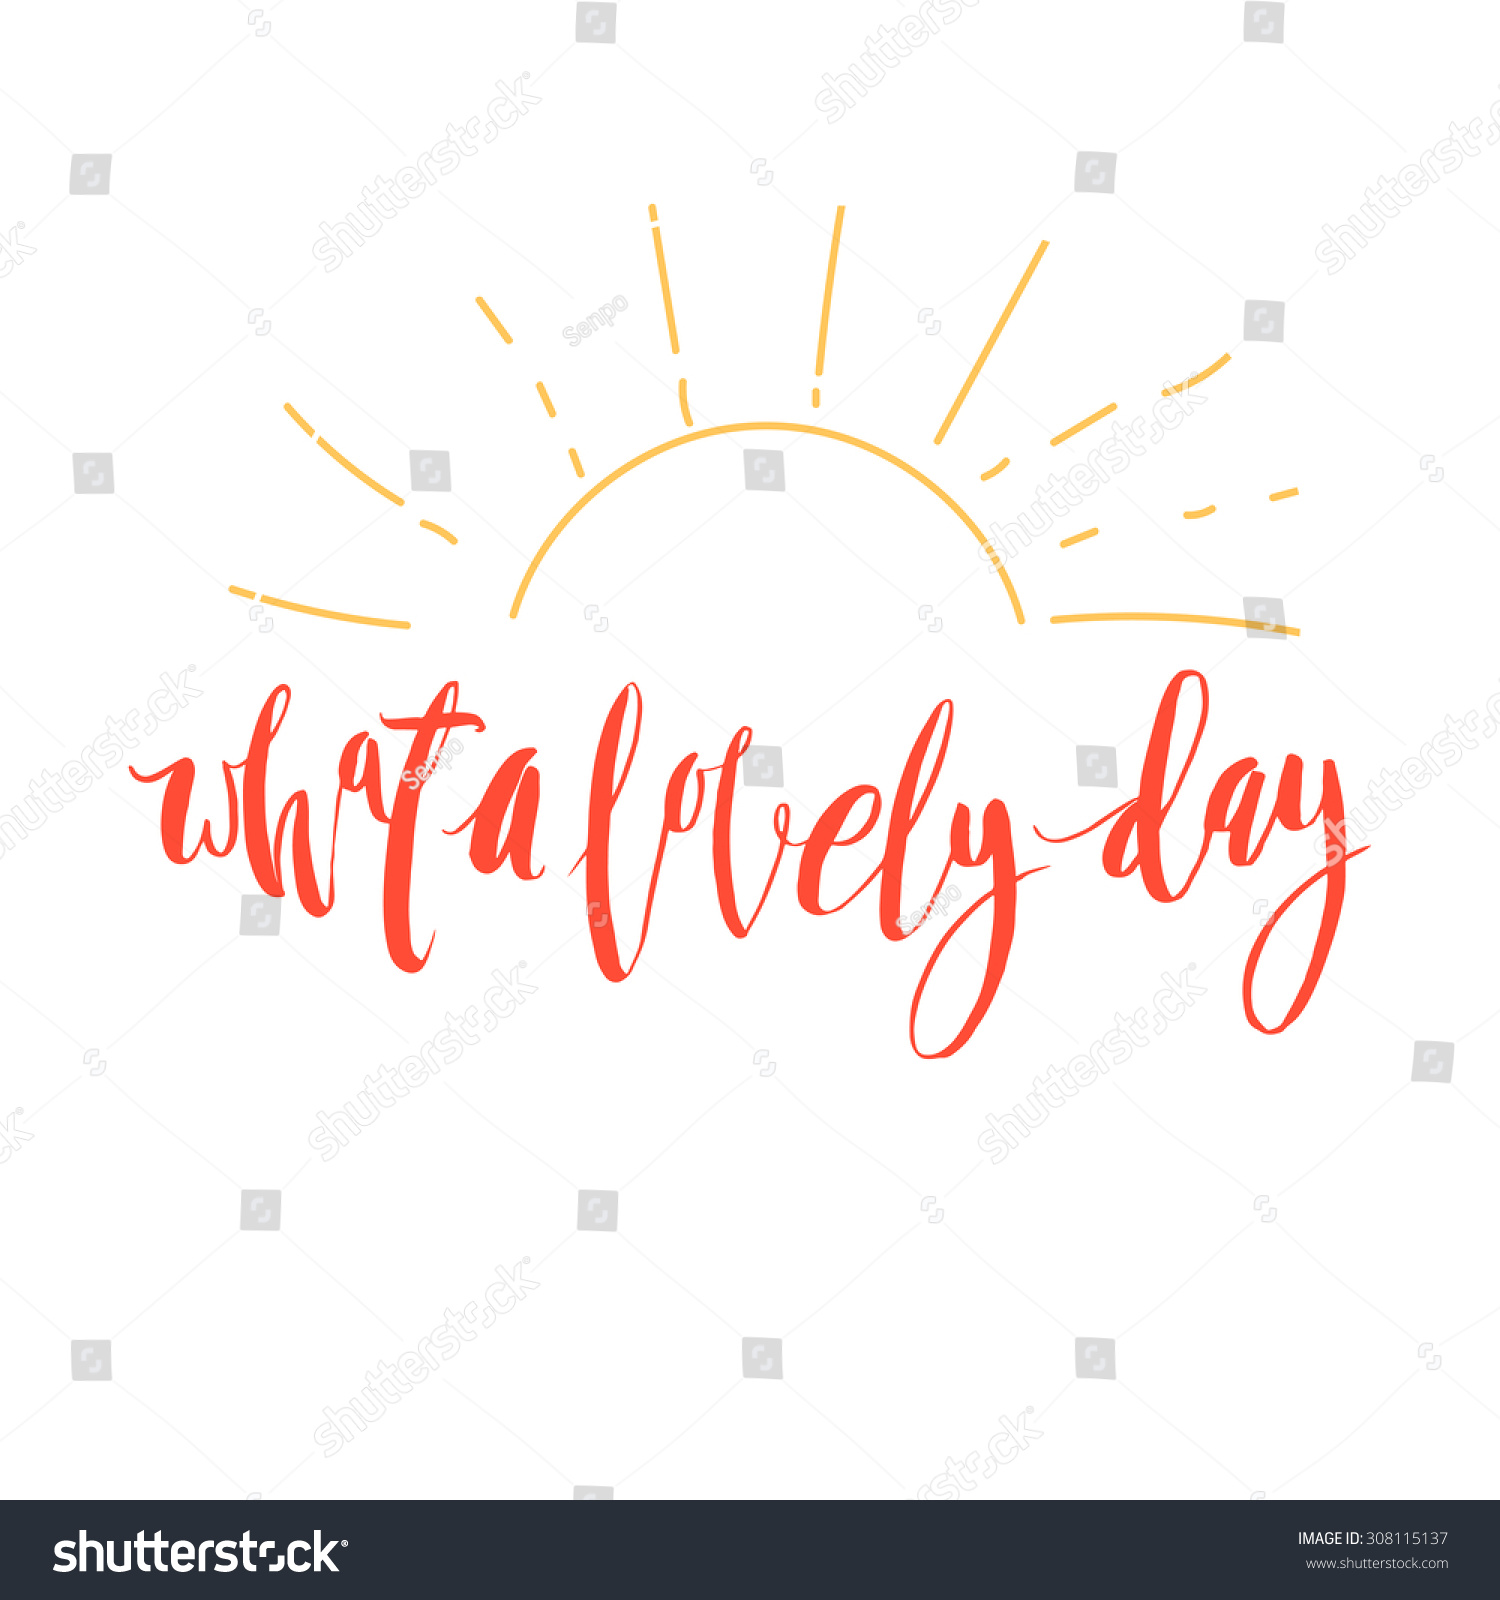 What a lovely day Hand lettering calligraphy quote